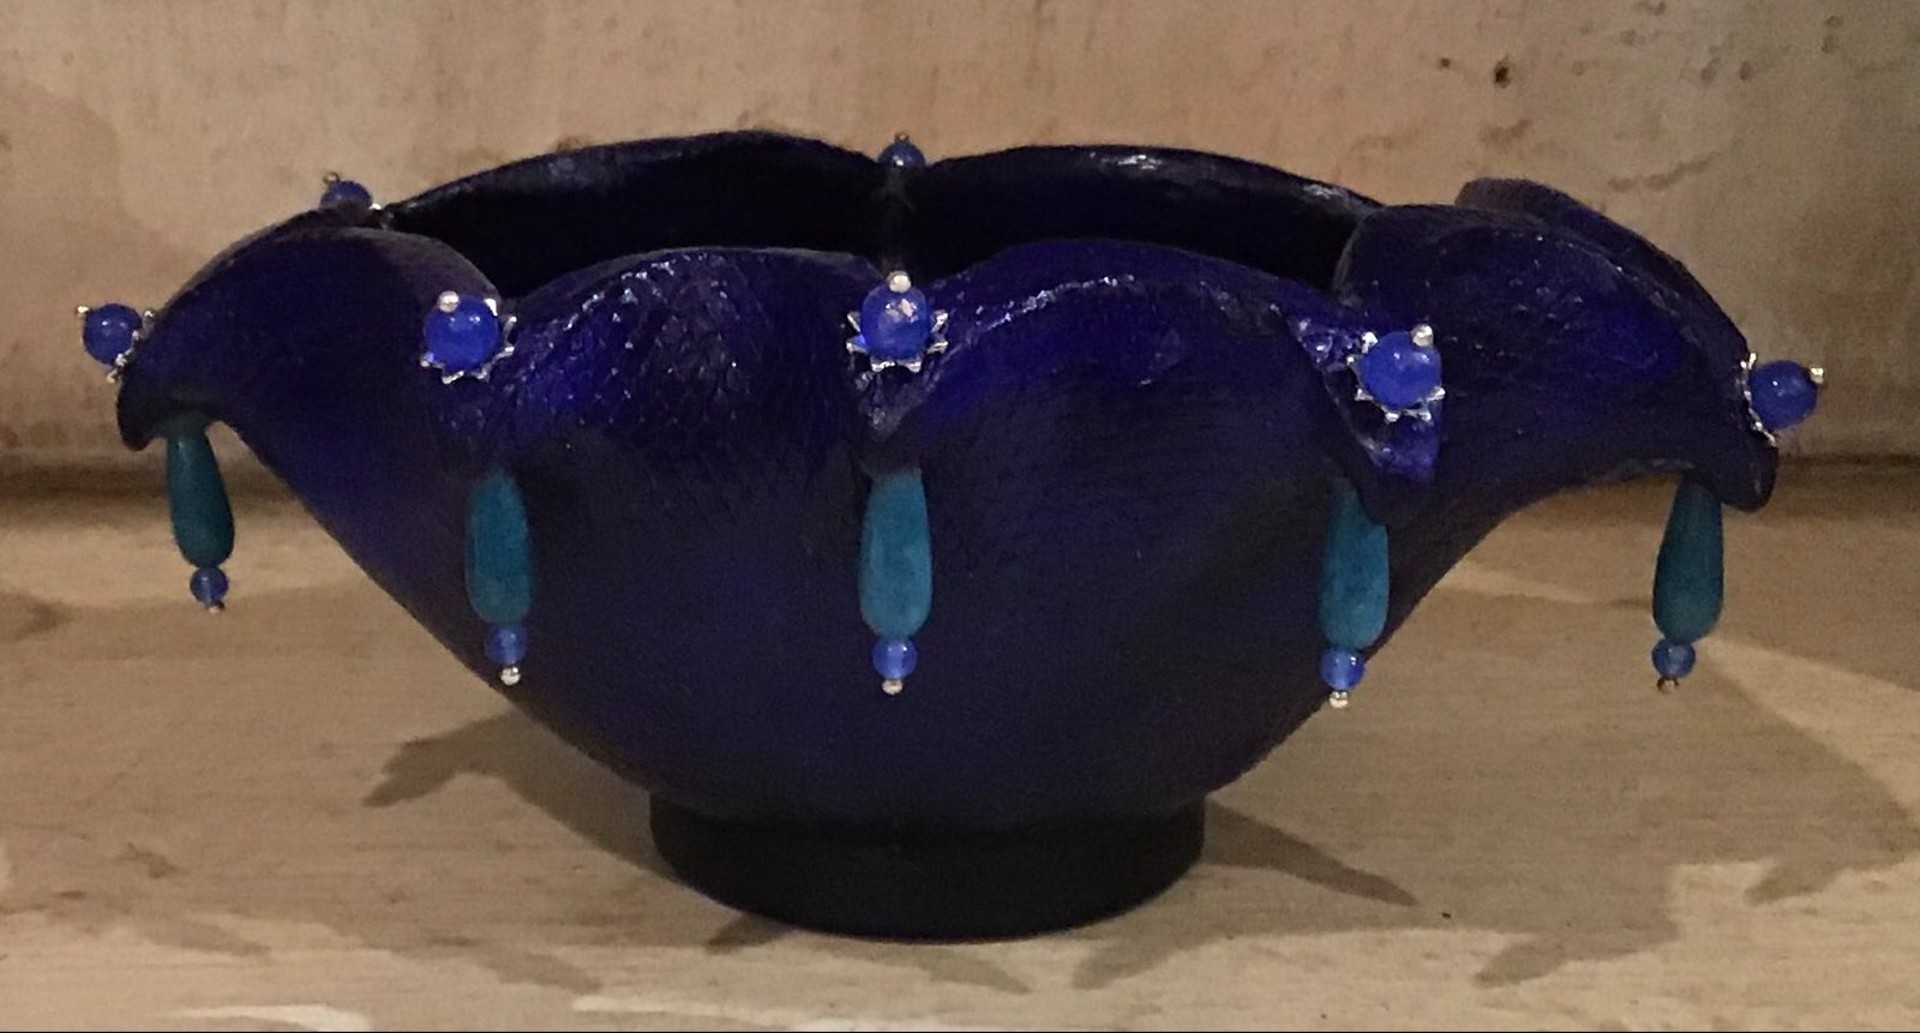 Star Shaped Stones in small blue bowl by Nancy Burns